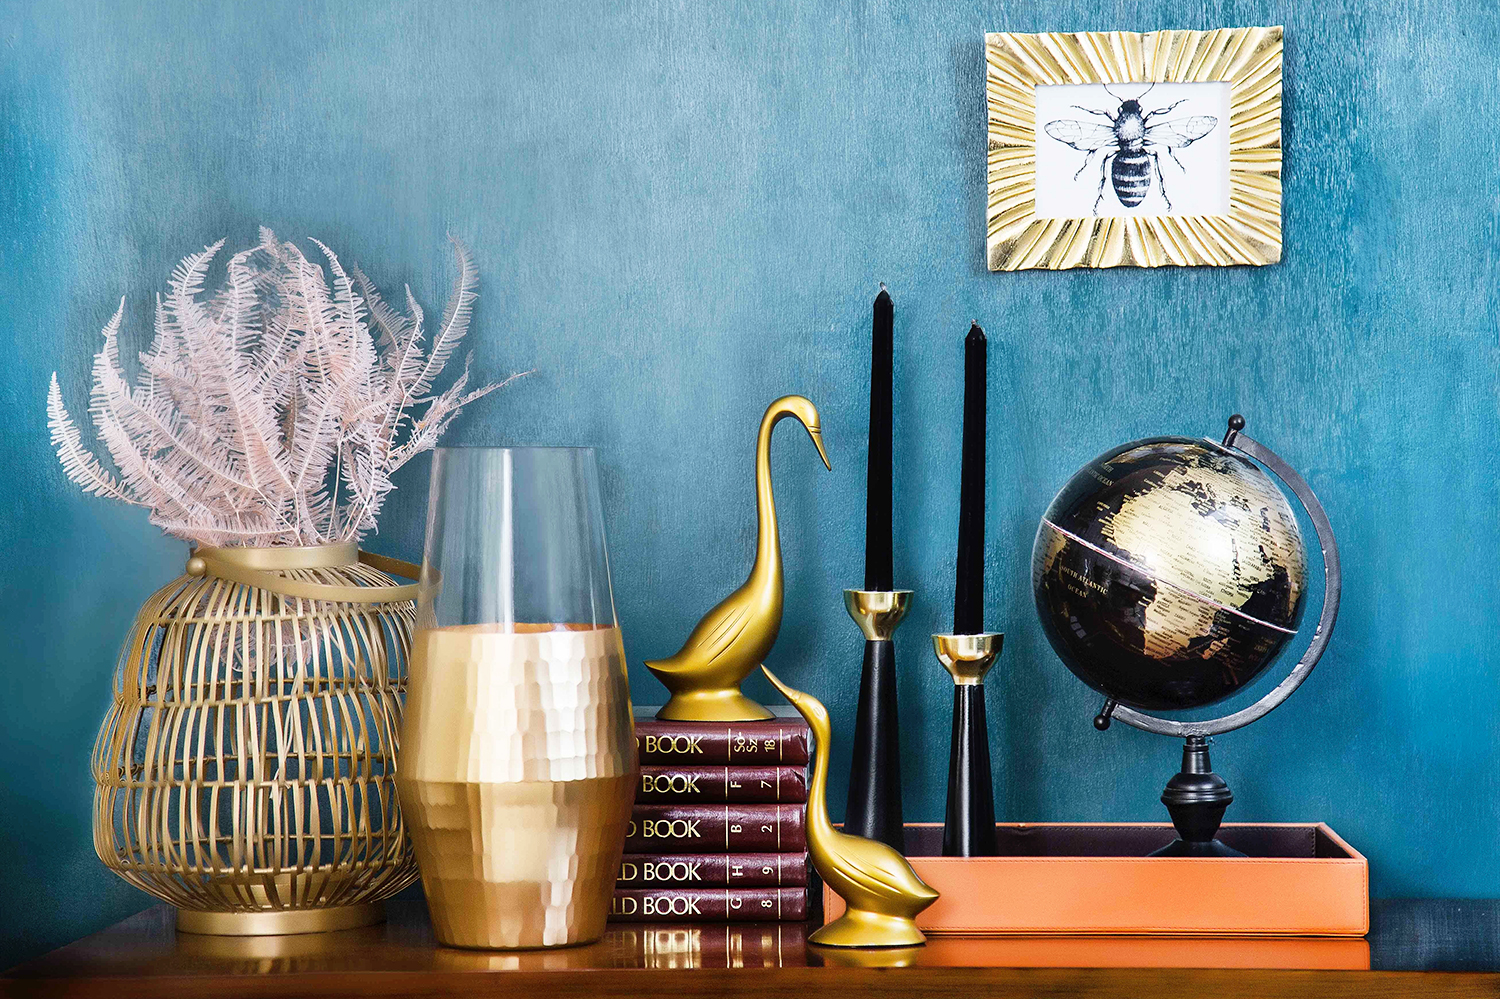 25 Best Home Decor Gifts That Will Delight 2023